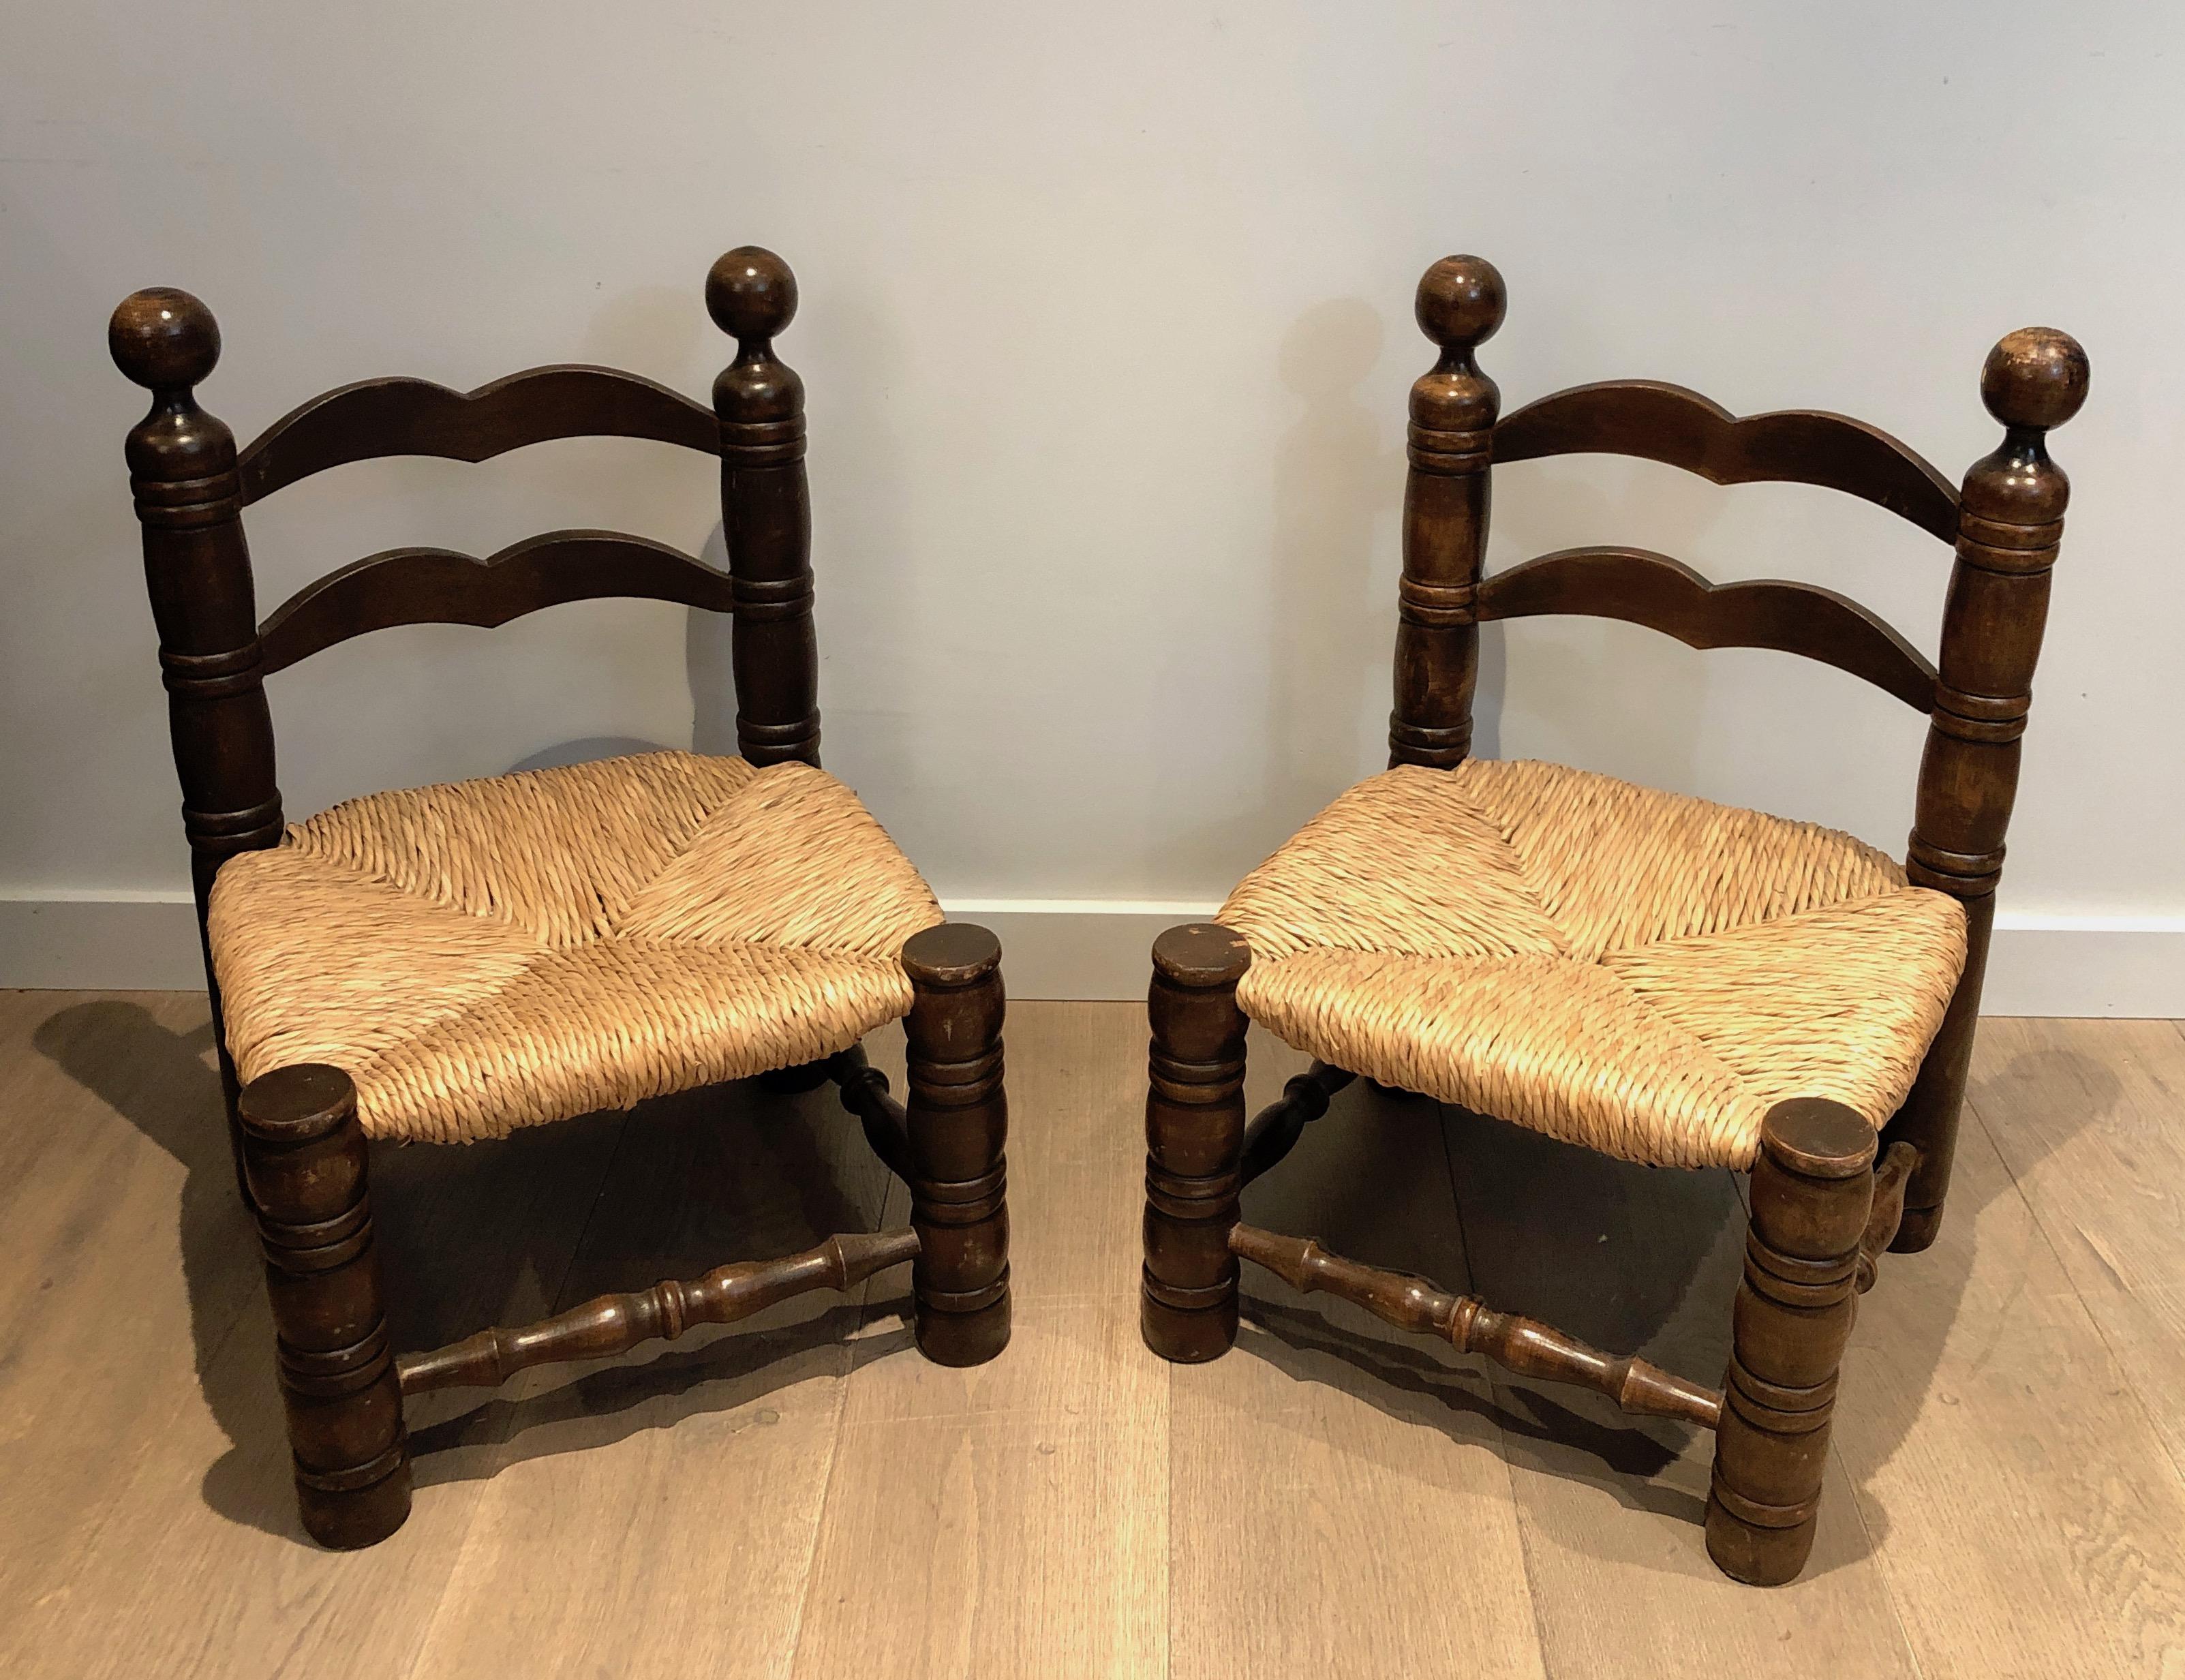 Pair of Low Brutalist Chairs. French work by Charles Dudouyt. Circa 1920. 7